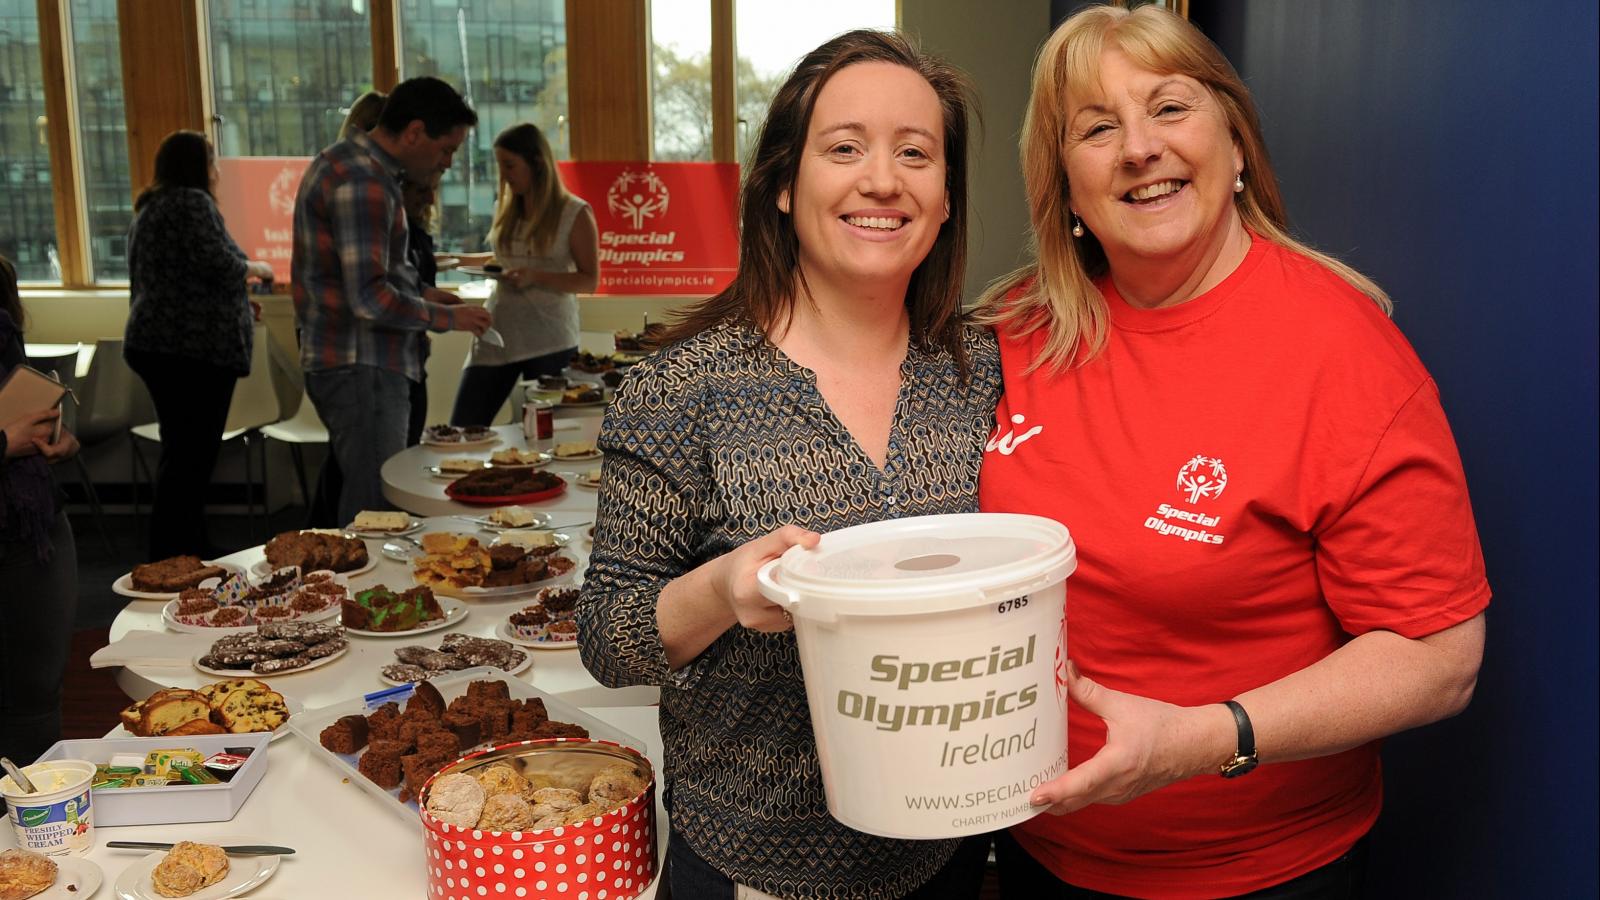 Two fundraisers holding a collection bucket at a coffee morning in their workplace